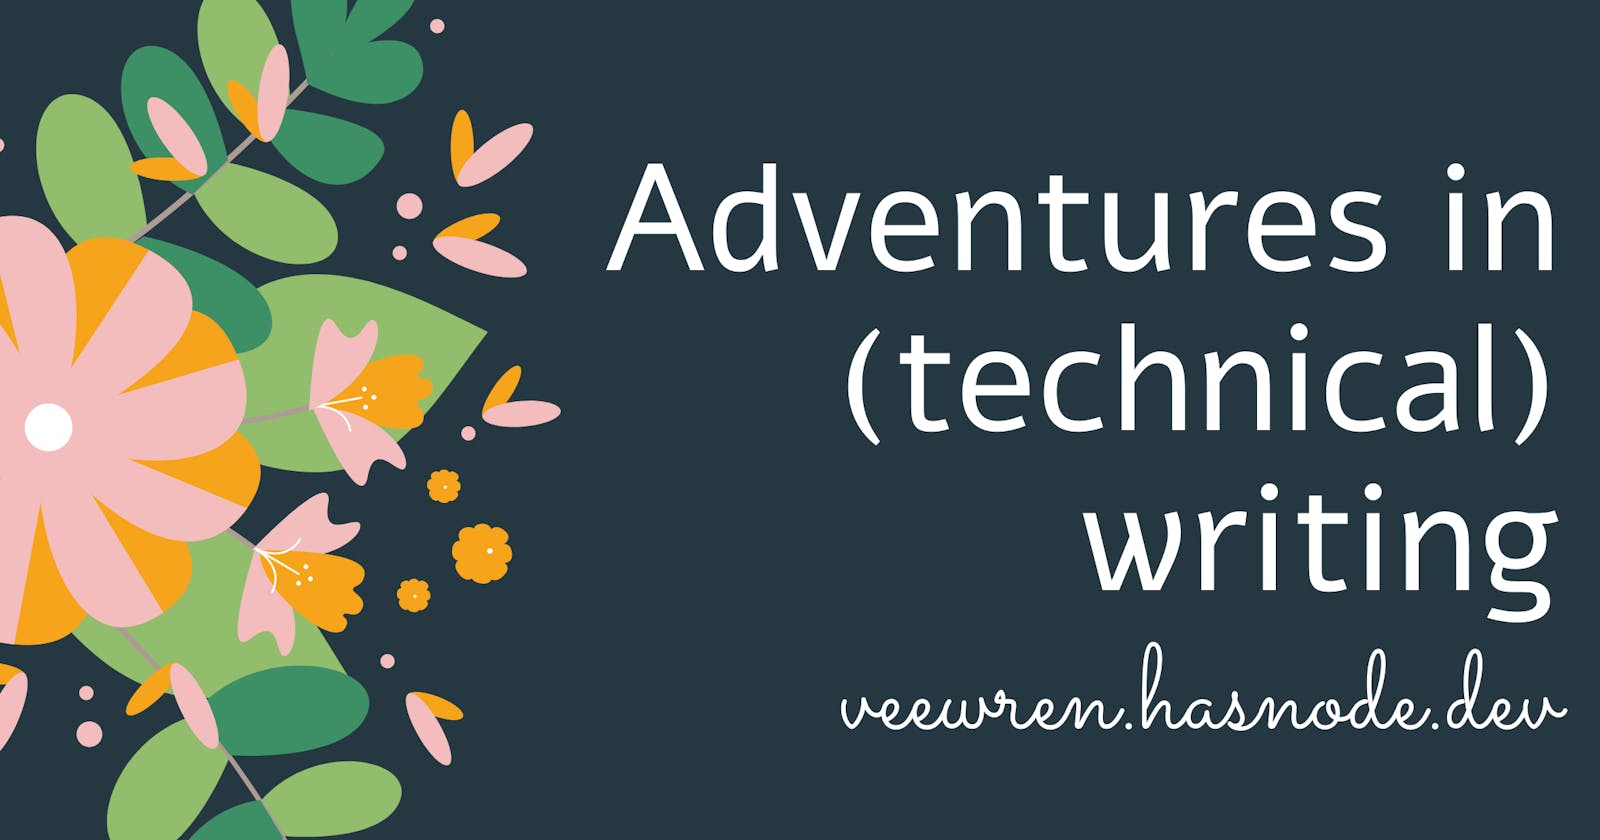 Adventures in (Technical) Writing